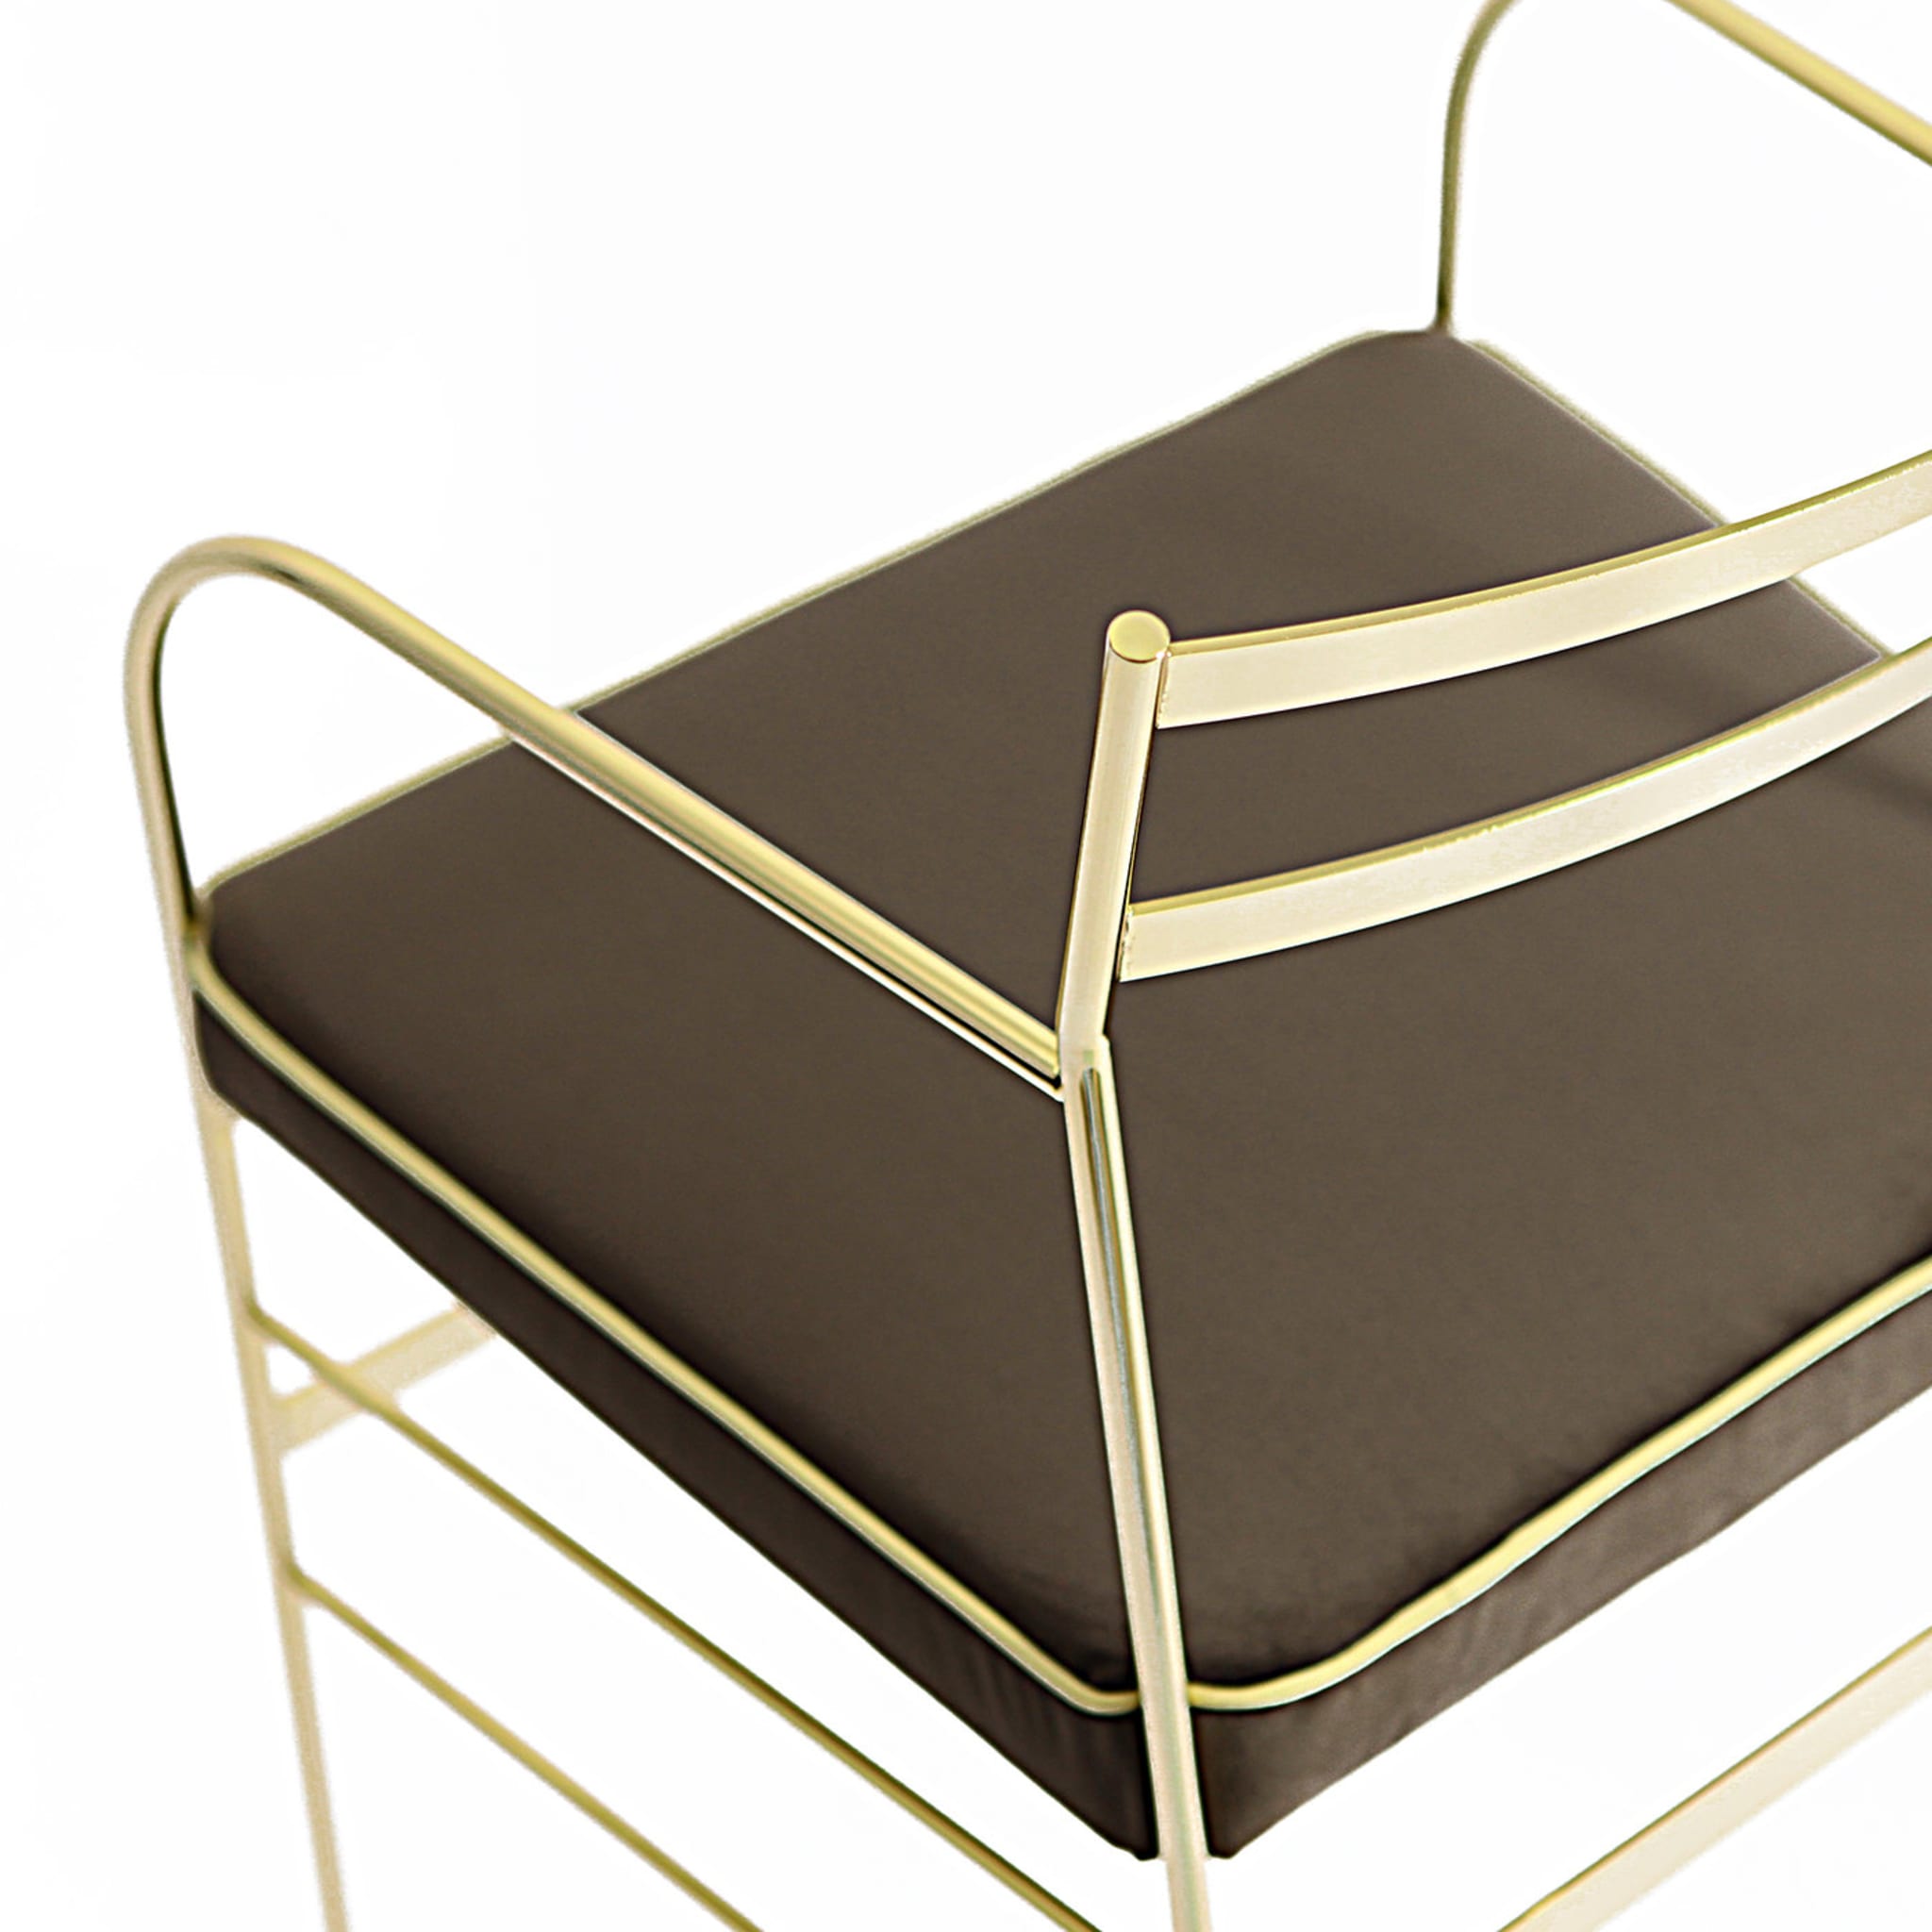 Set of 2 Paul Gold and Chocolate Chair - Alternative view 2